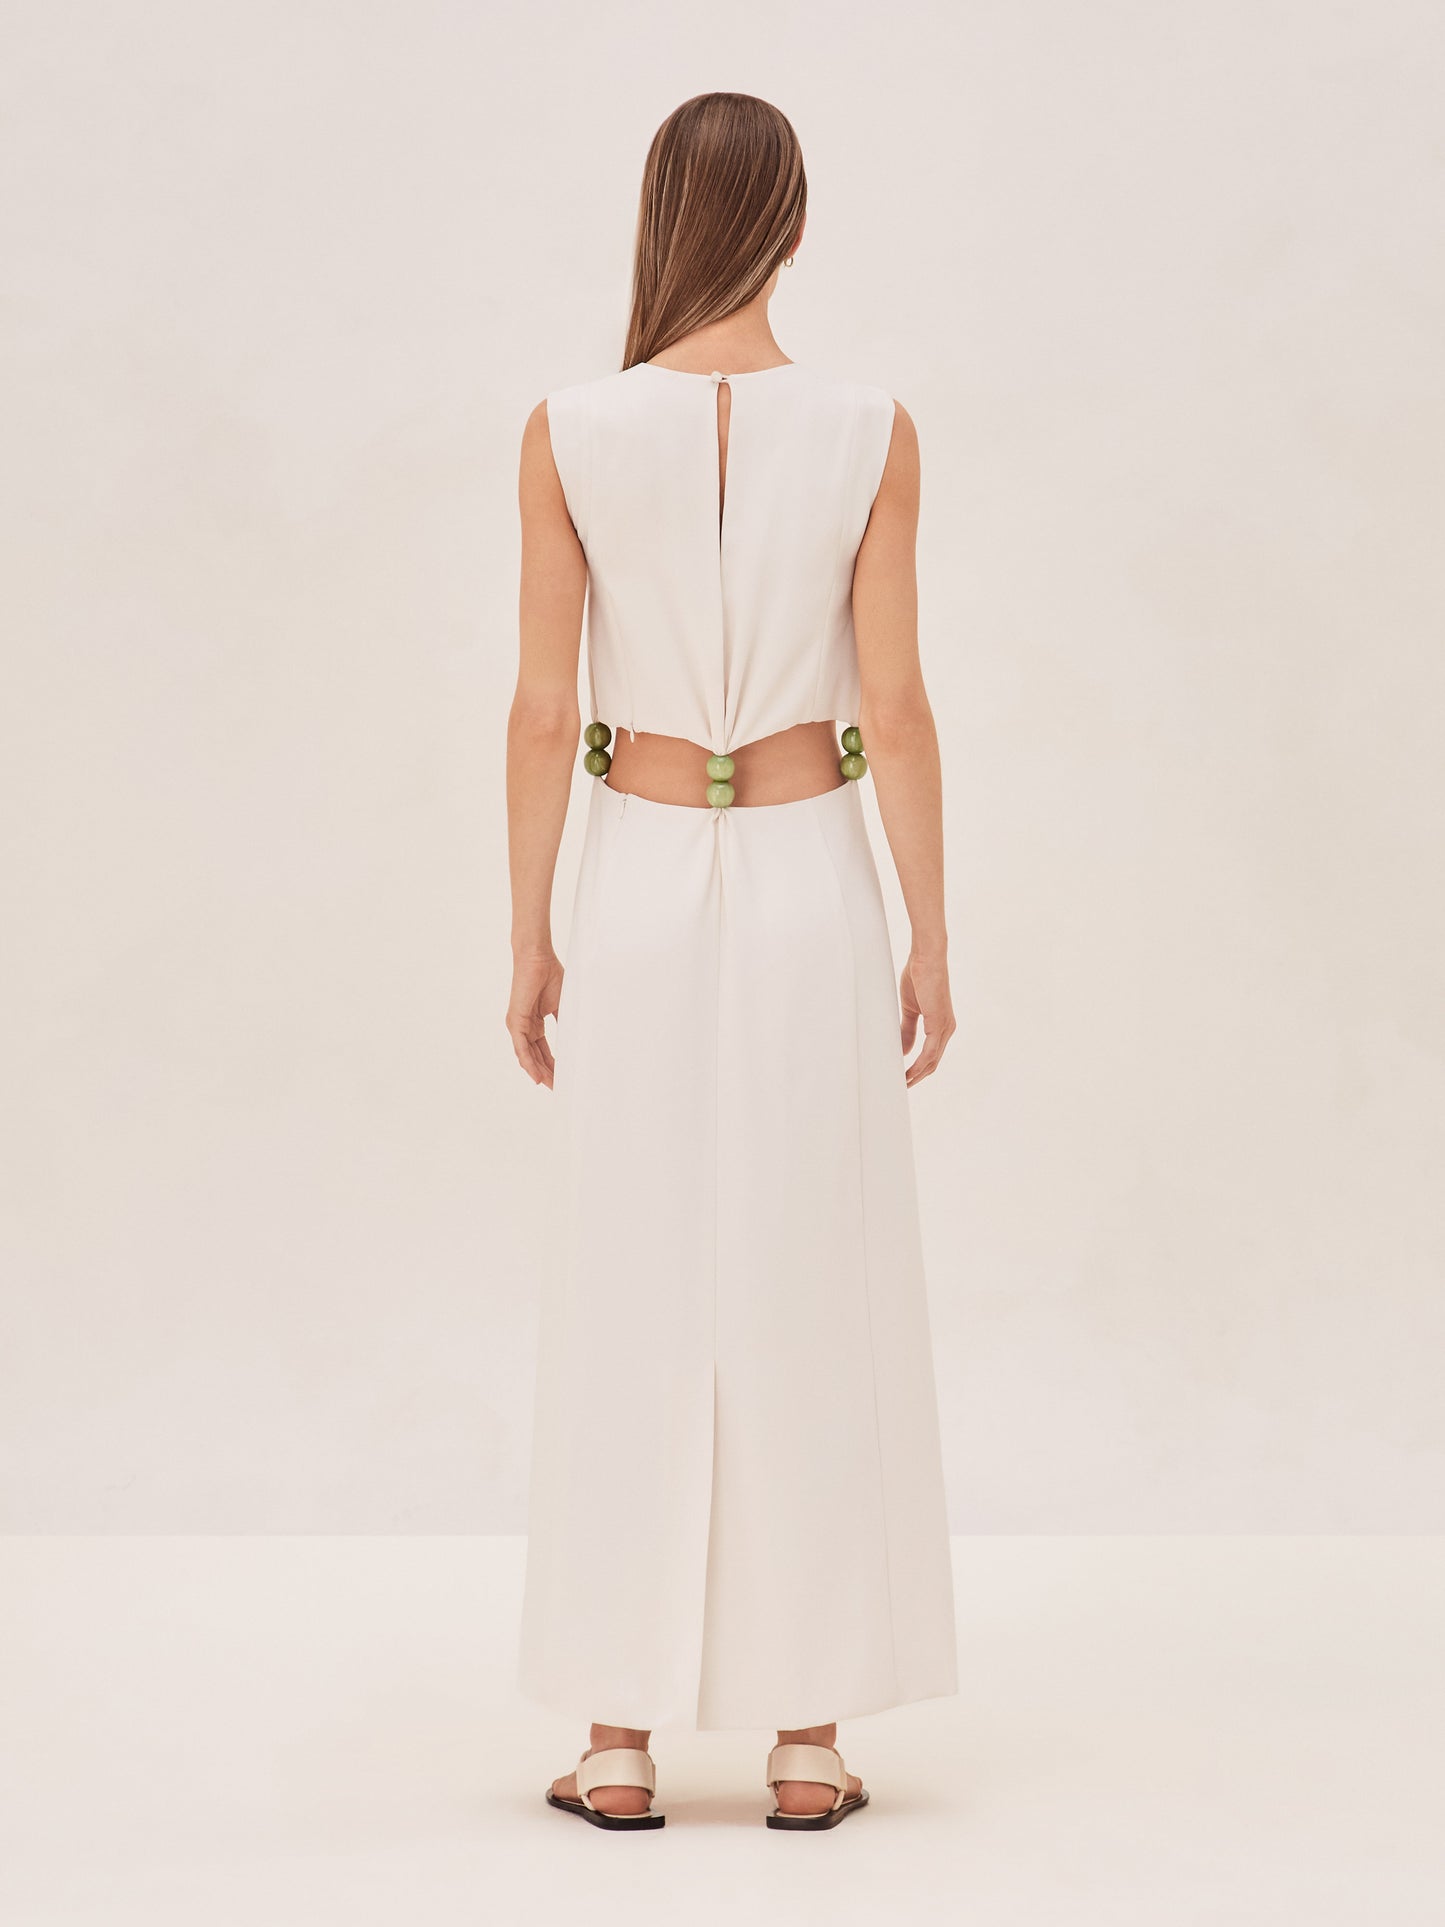 ALEXIS coppola ivory sleeveless dress with jade beaded detail and stomach cut outs back image